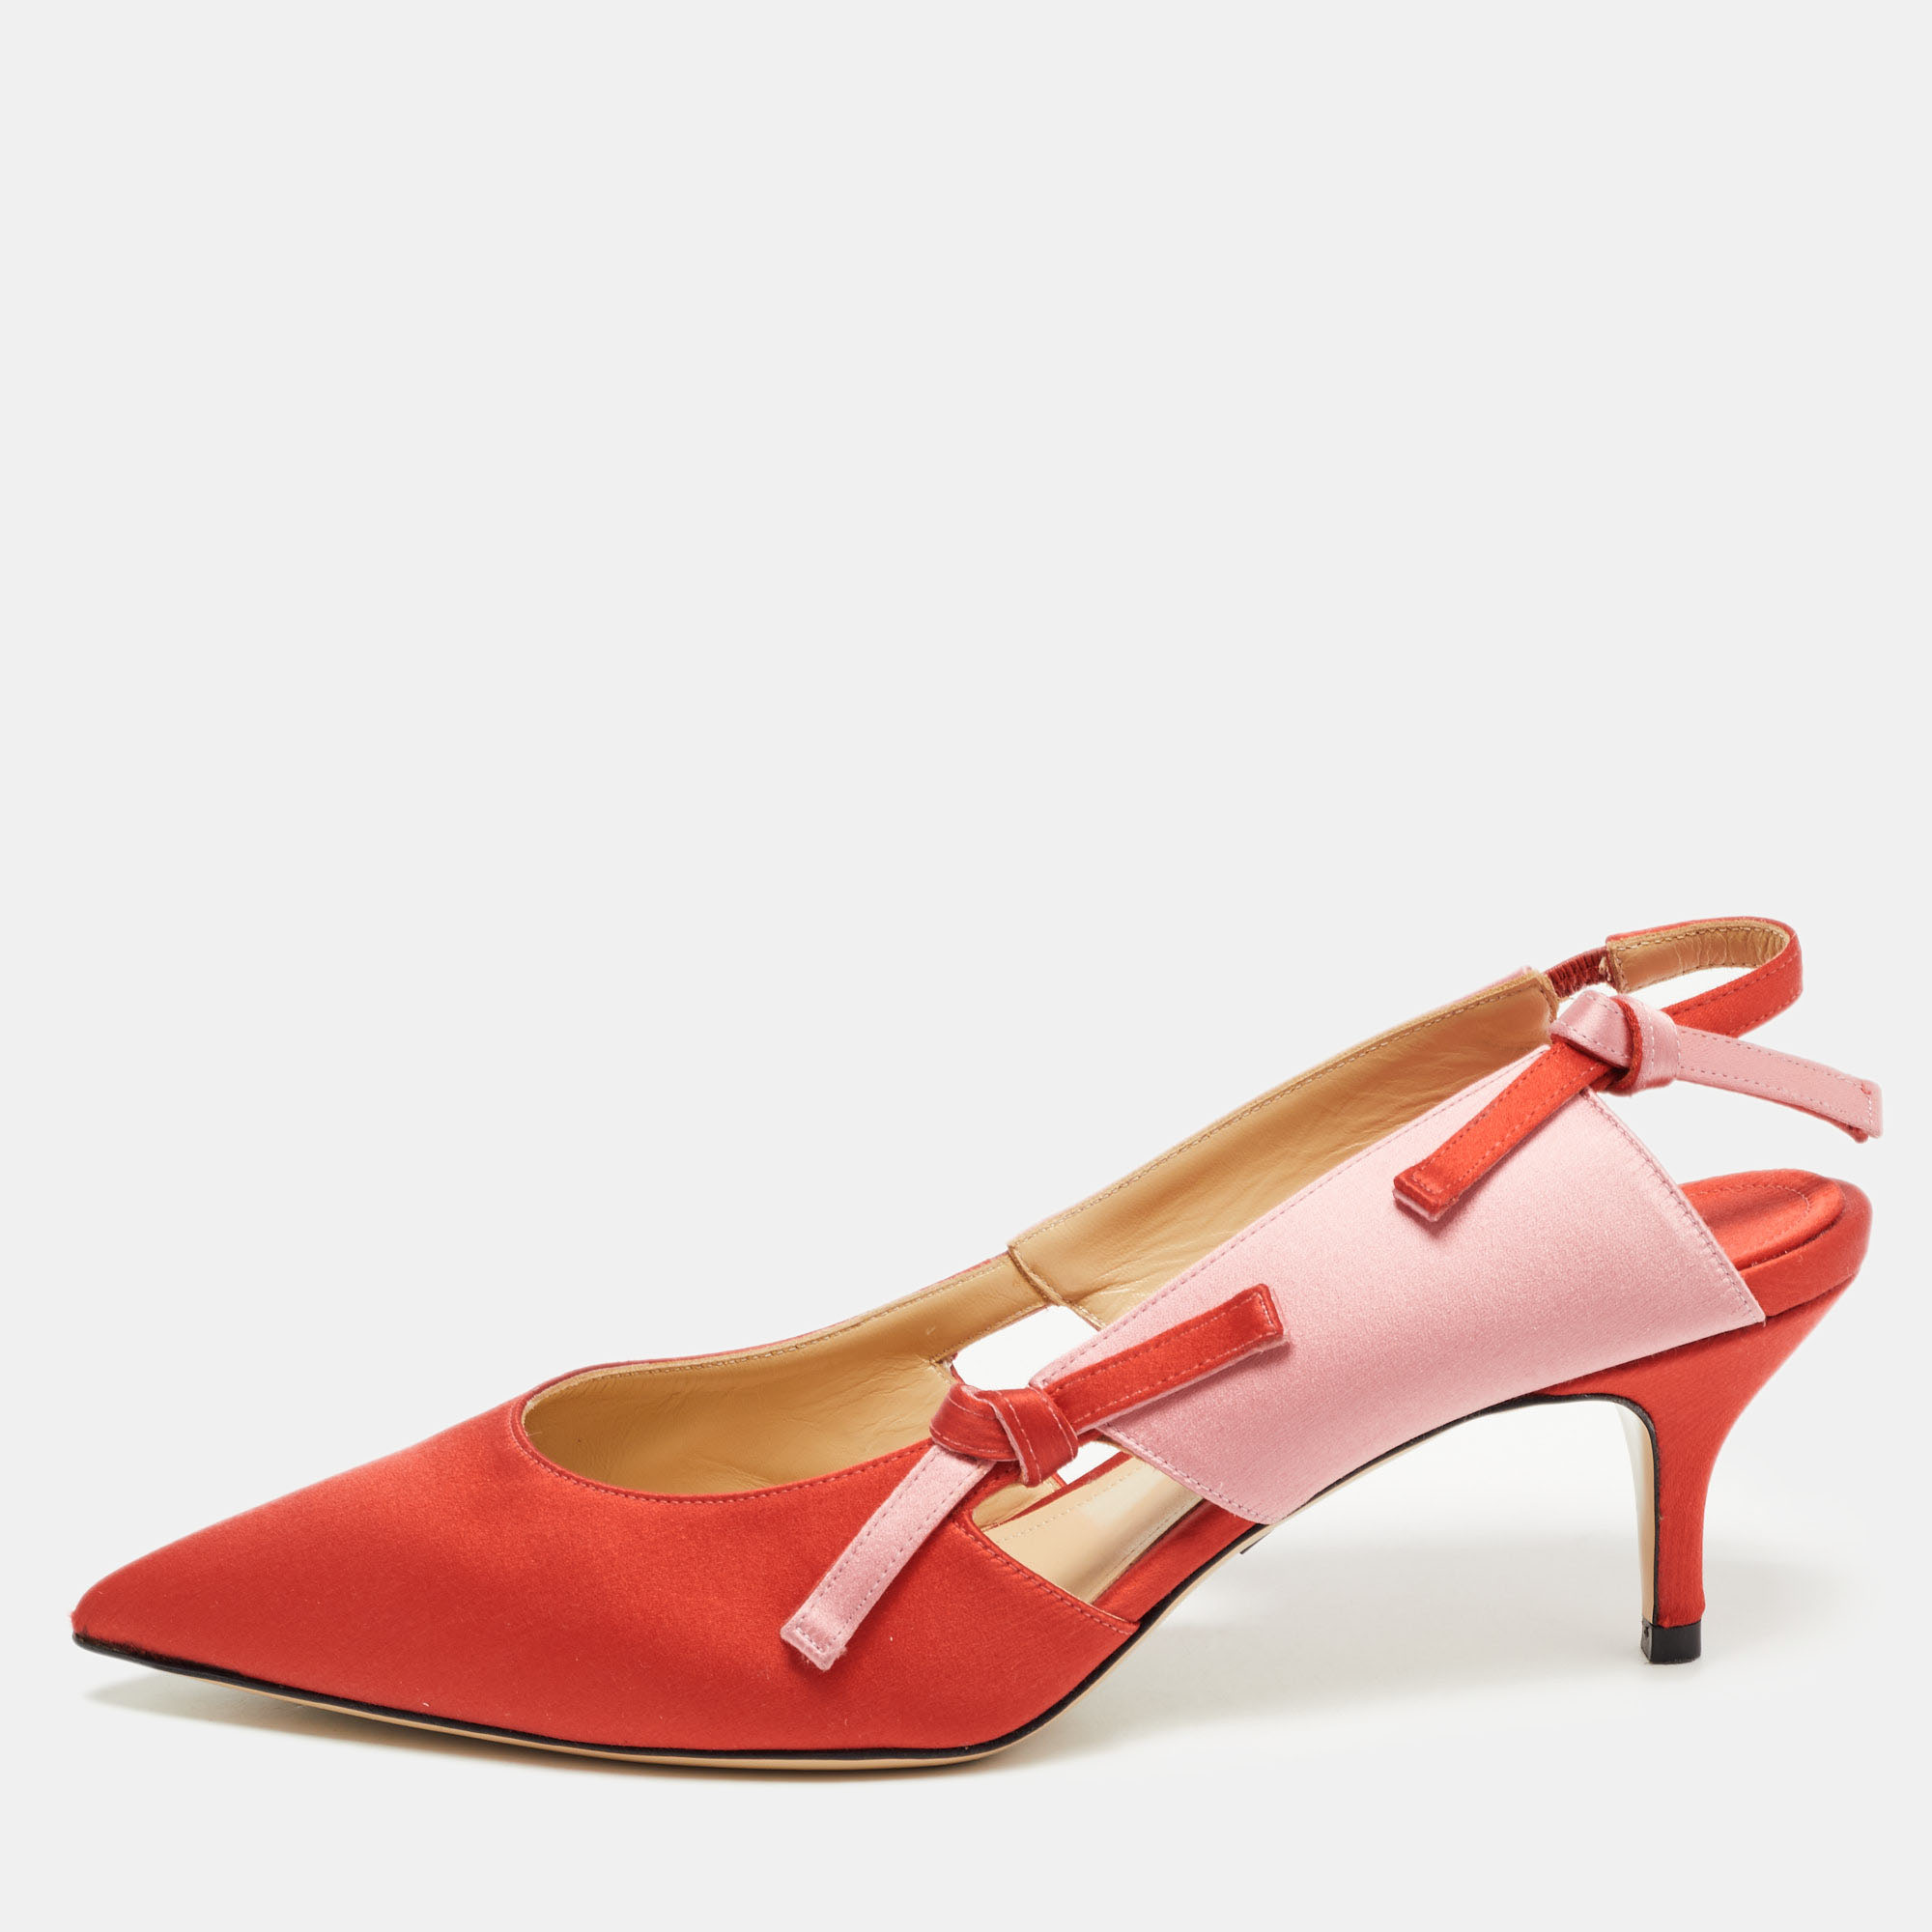 Pre-owned Paul Andrew Red/pink Satin Bow Slingback Pumps Size 38